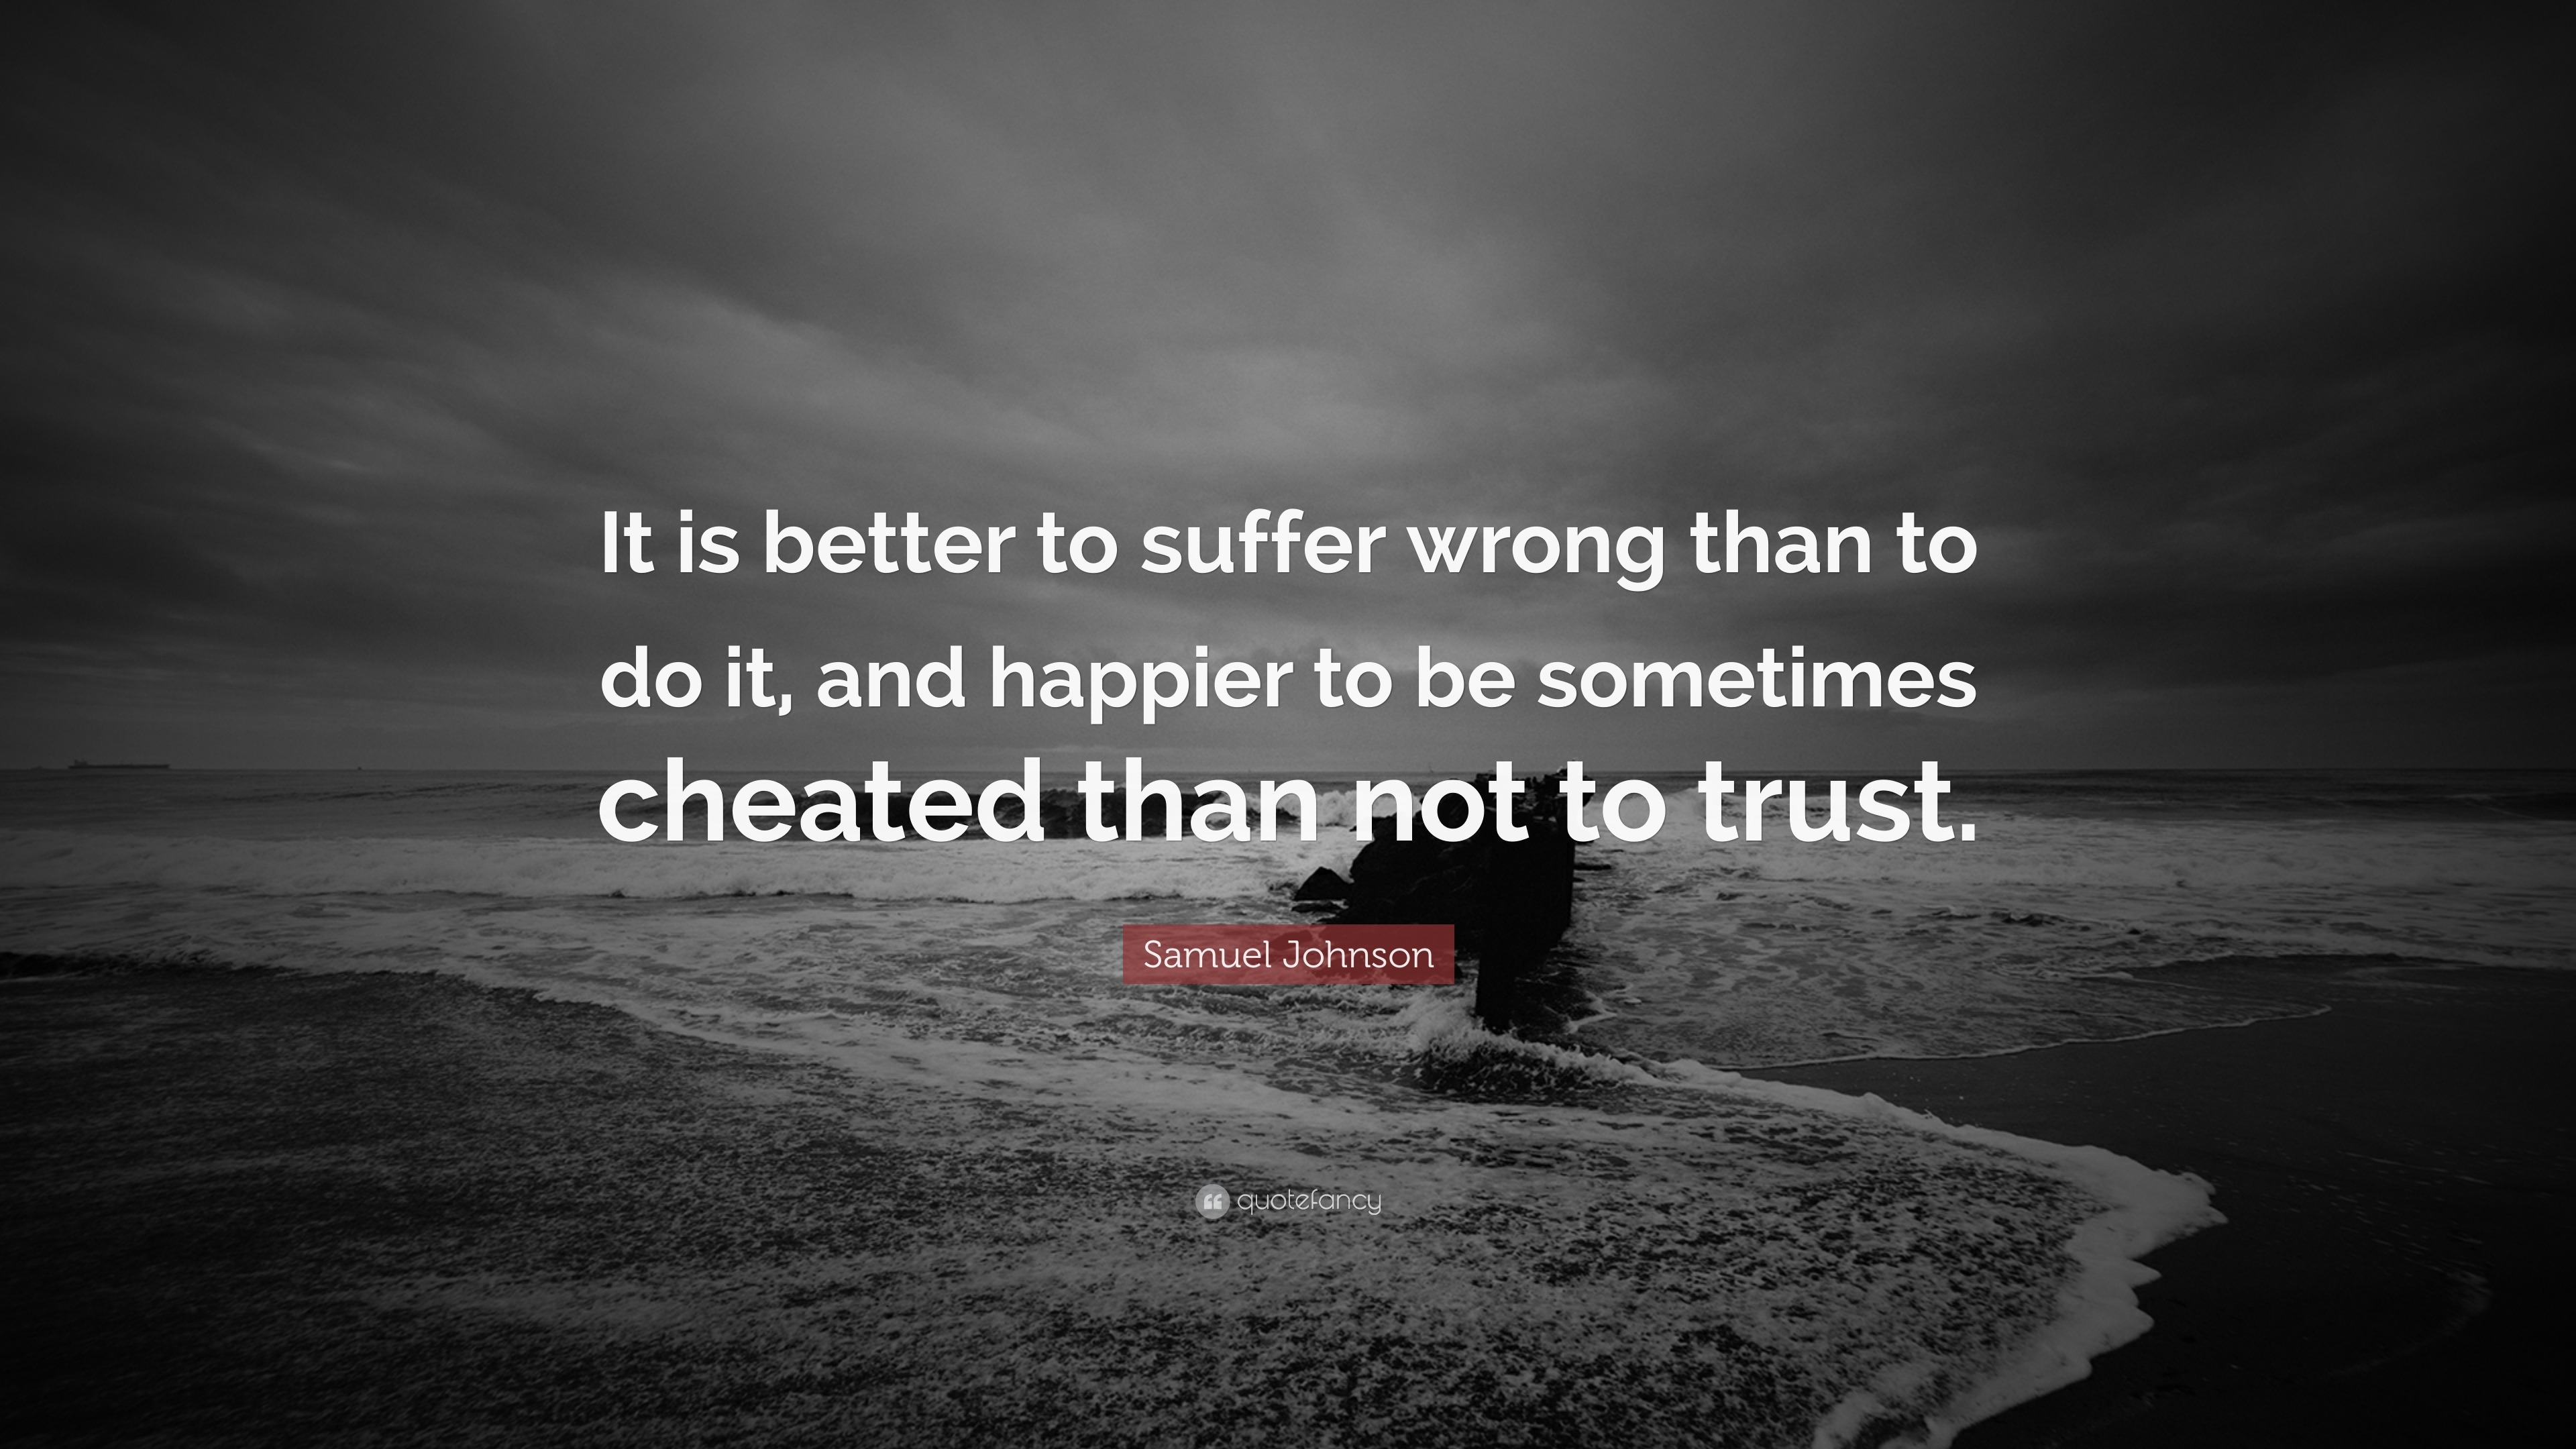 Samuel Johnson Quote: “It is better to suffer wrong than to do it, and